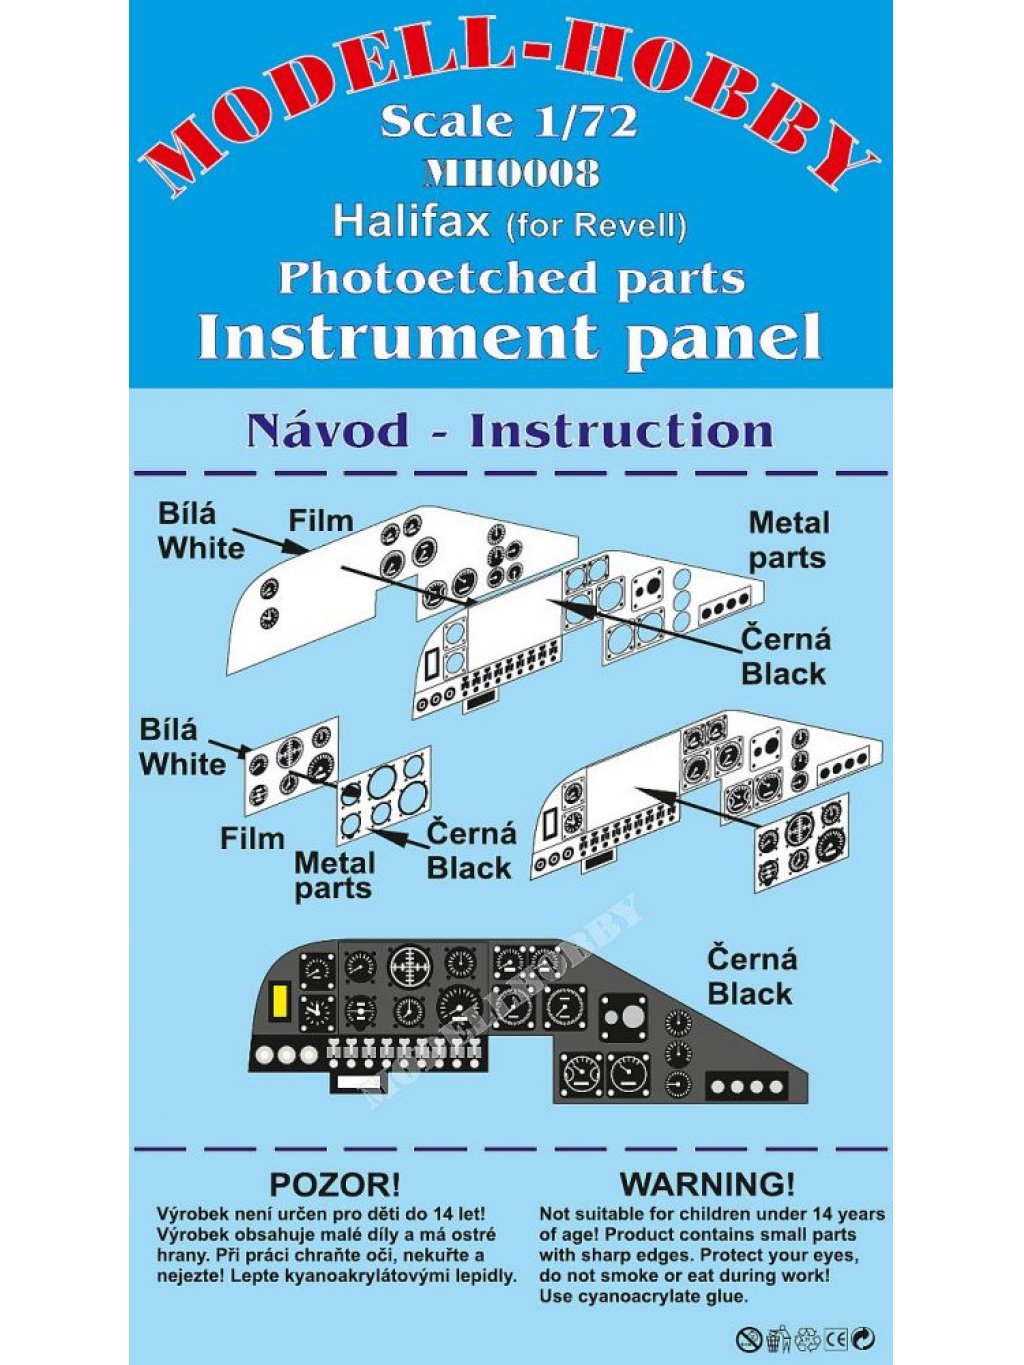 H.P. Halifax Photoetched parts instrument panel for Revell ex Modell-Hobby